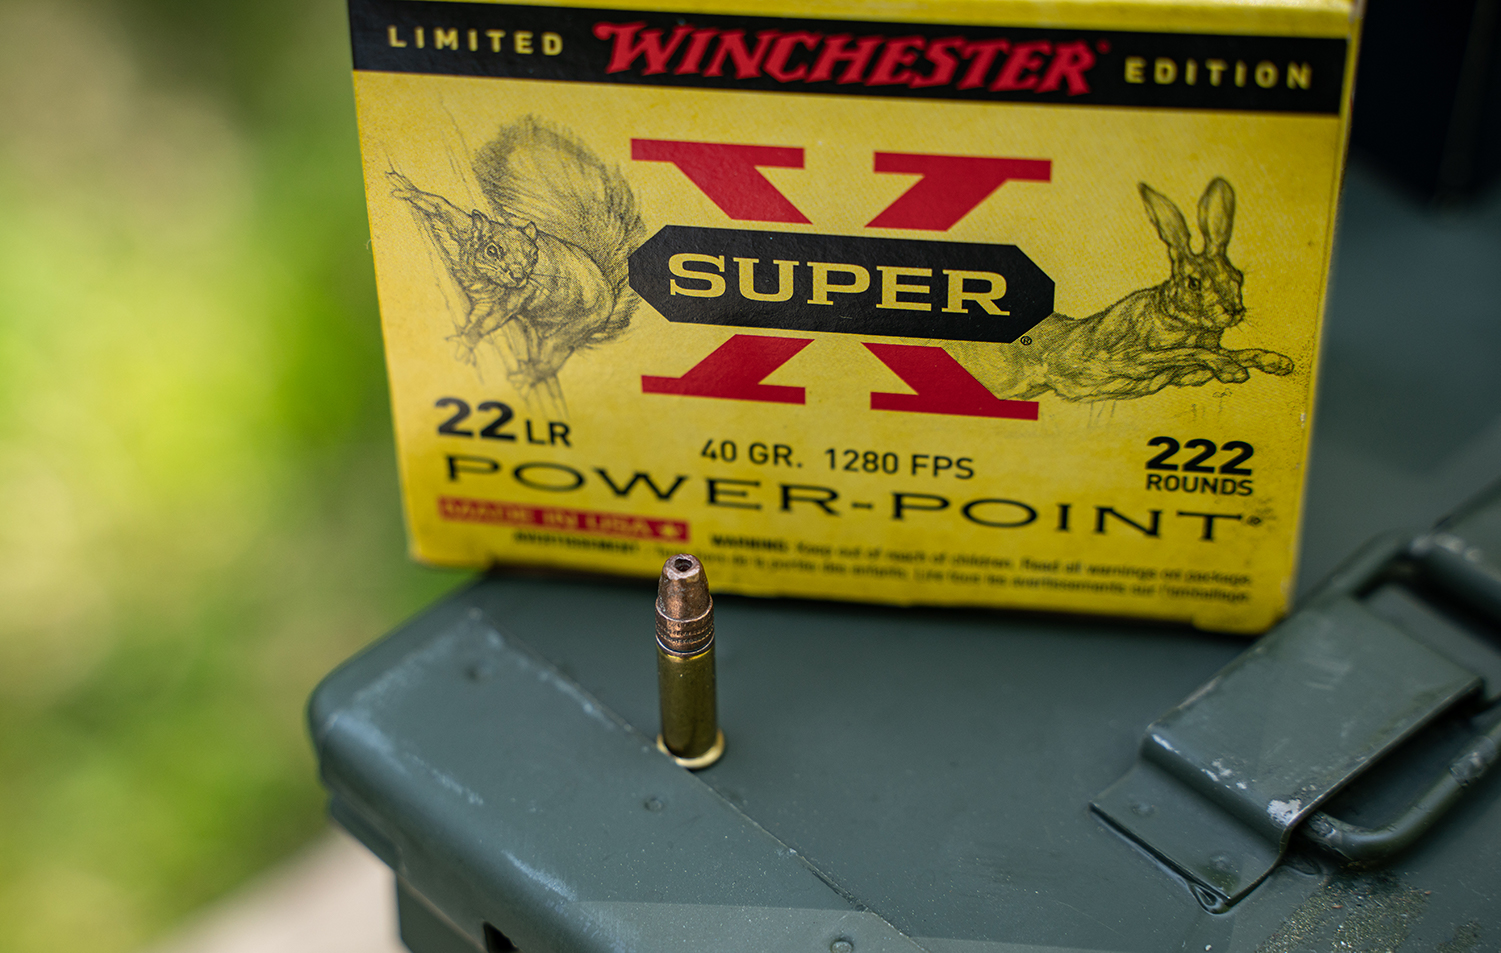 winchester super-x 22lr ammo for hunting